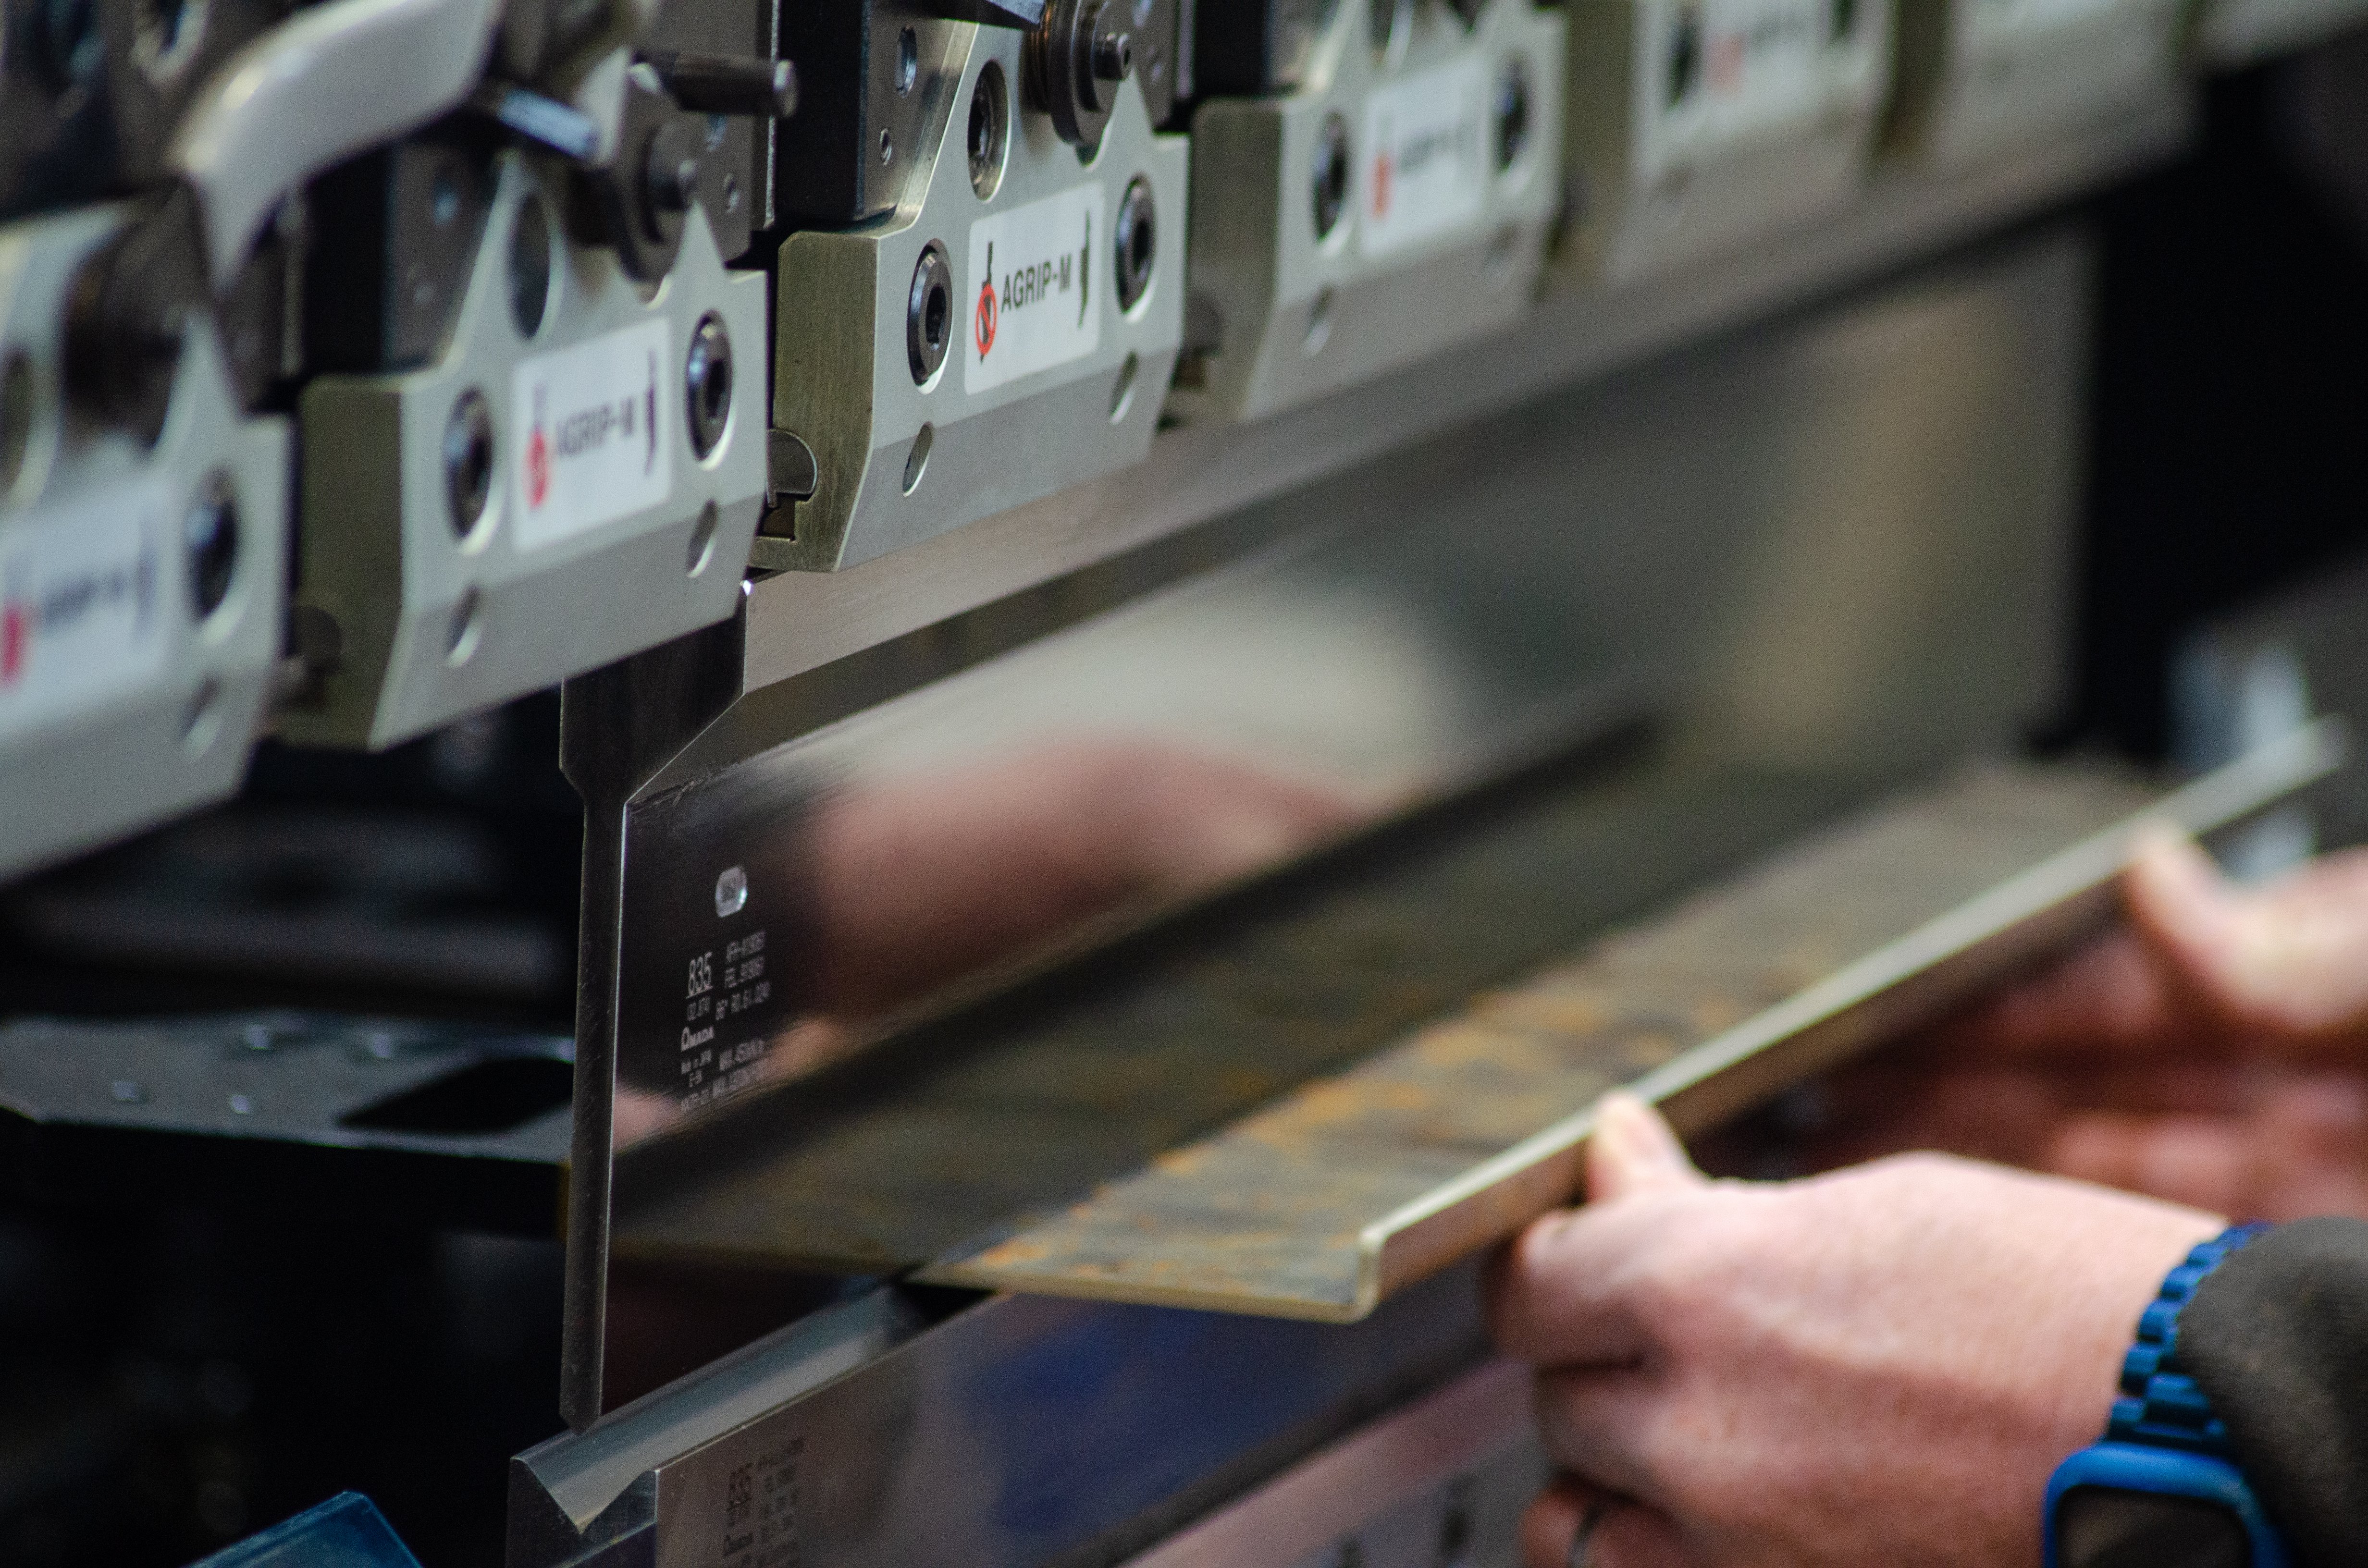 3 Reasons to Work with a Contract Manufacturer with Hydraulic Press Brake Capabilities